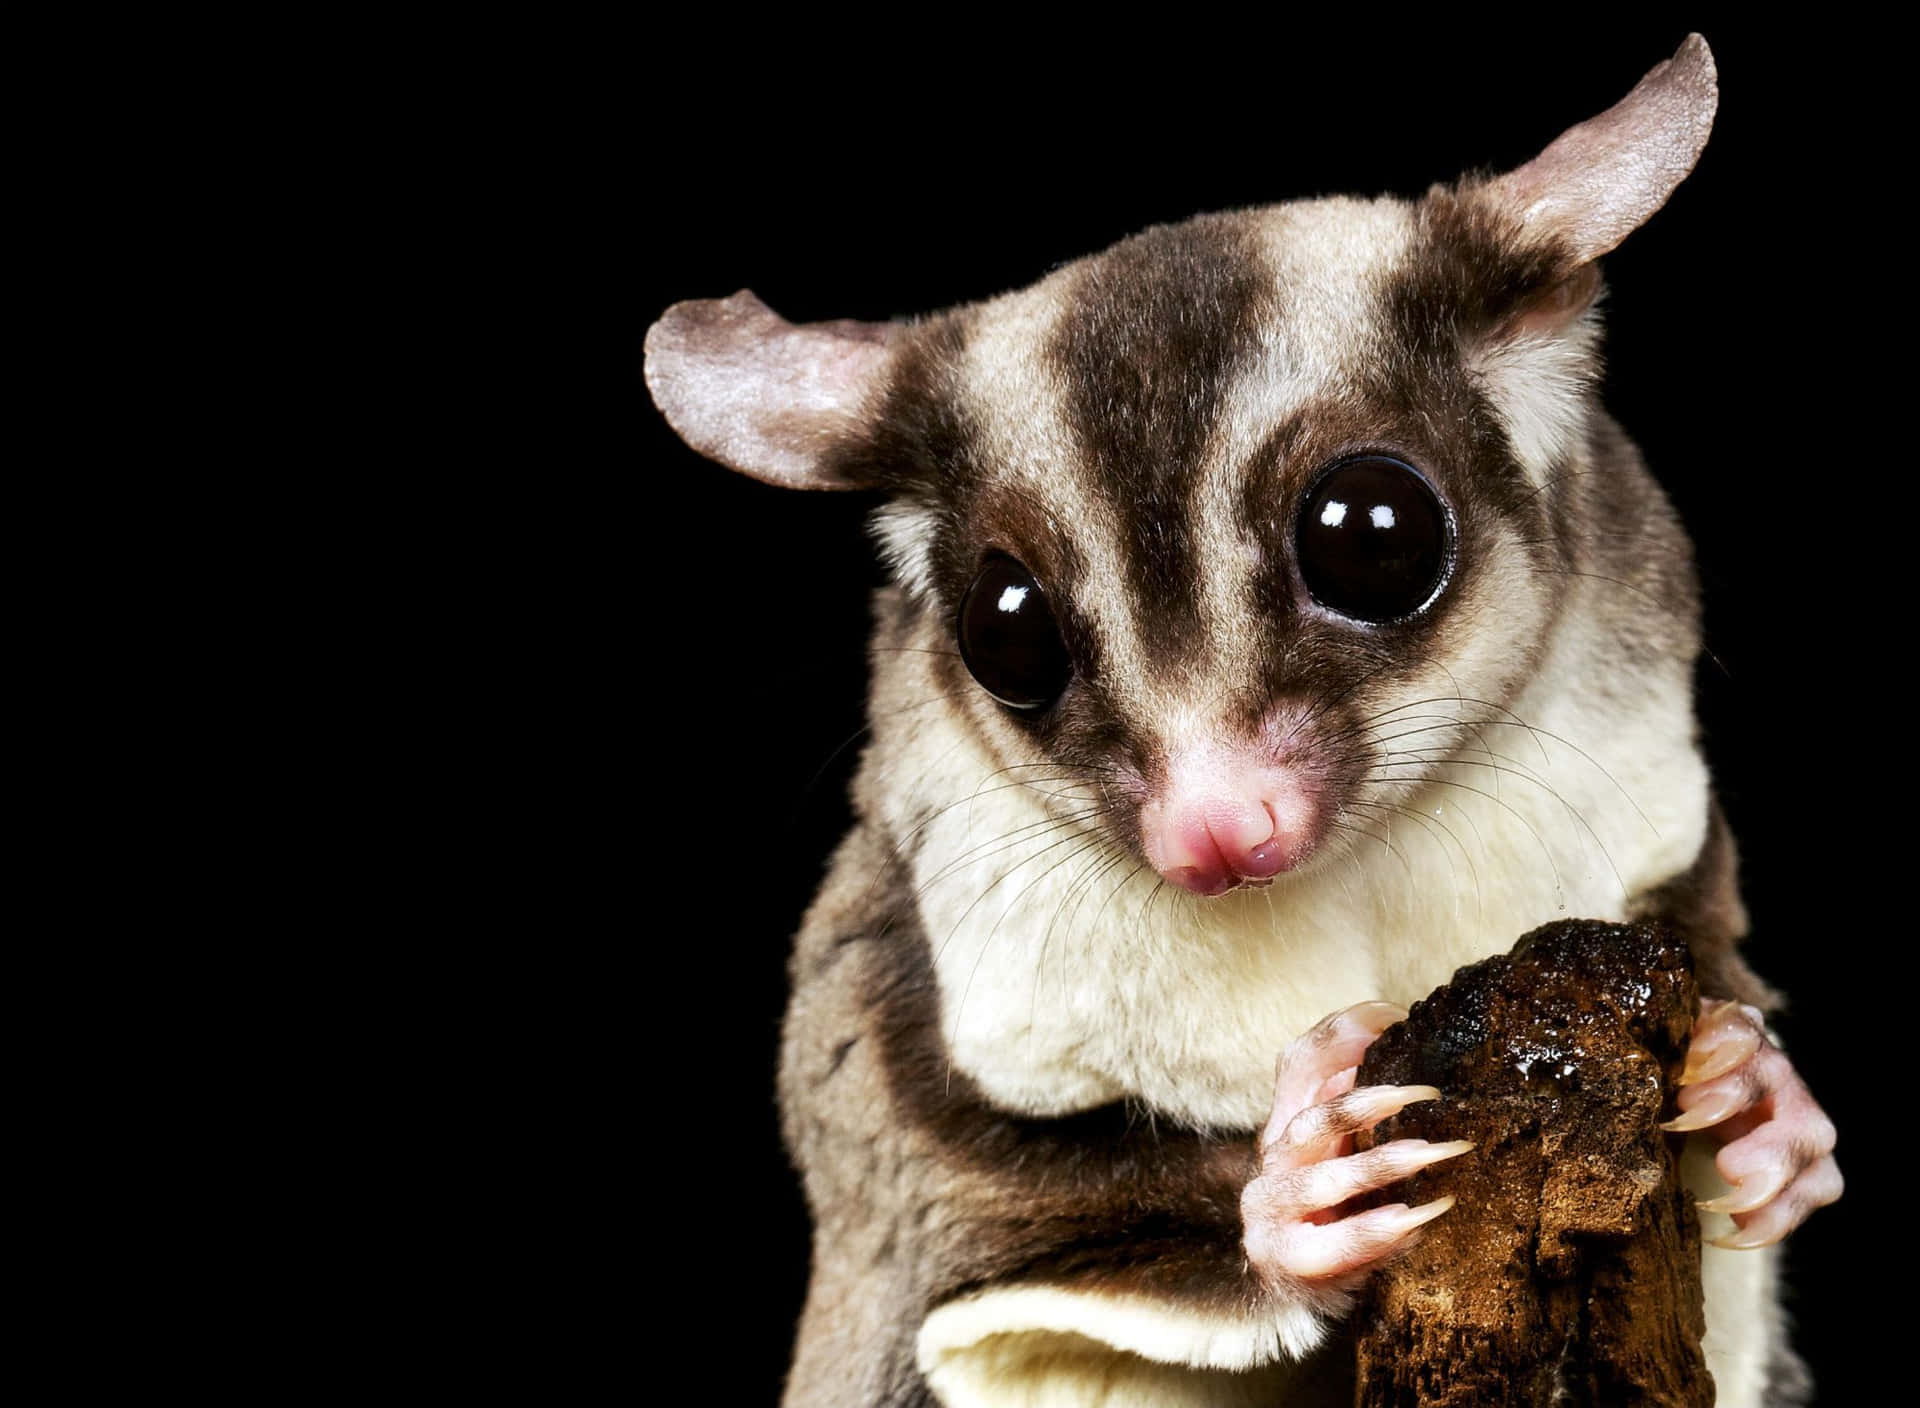 The Sweet and Gracious Sugar Glider